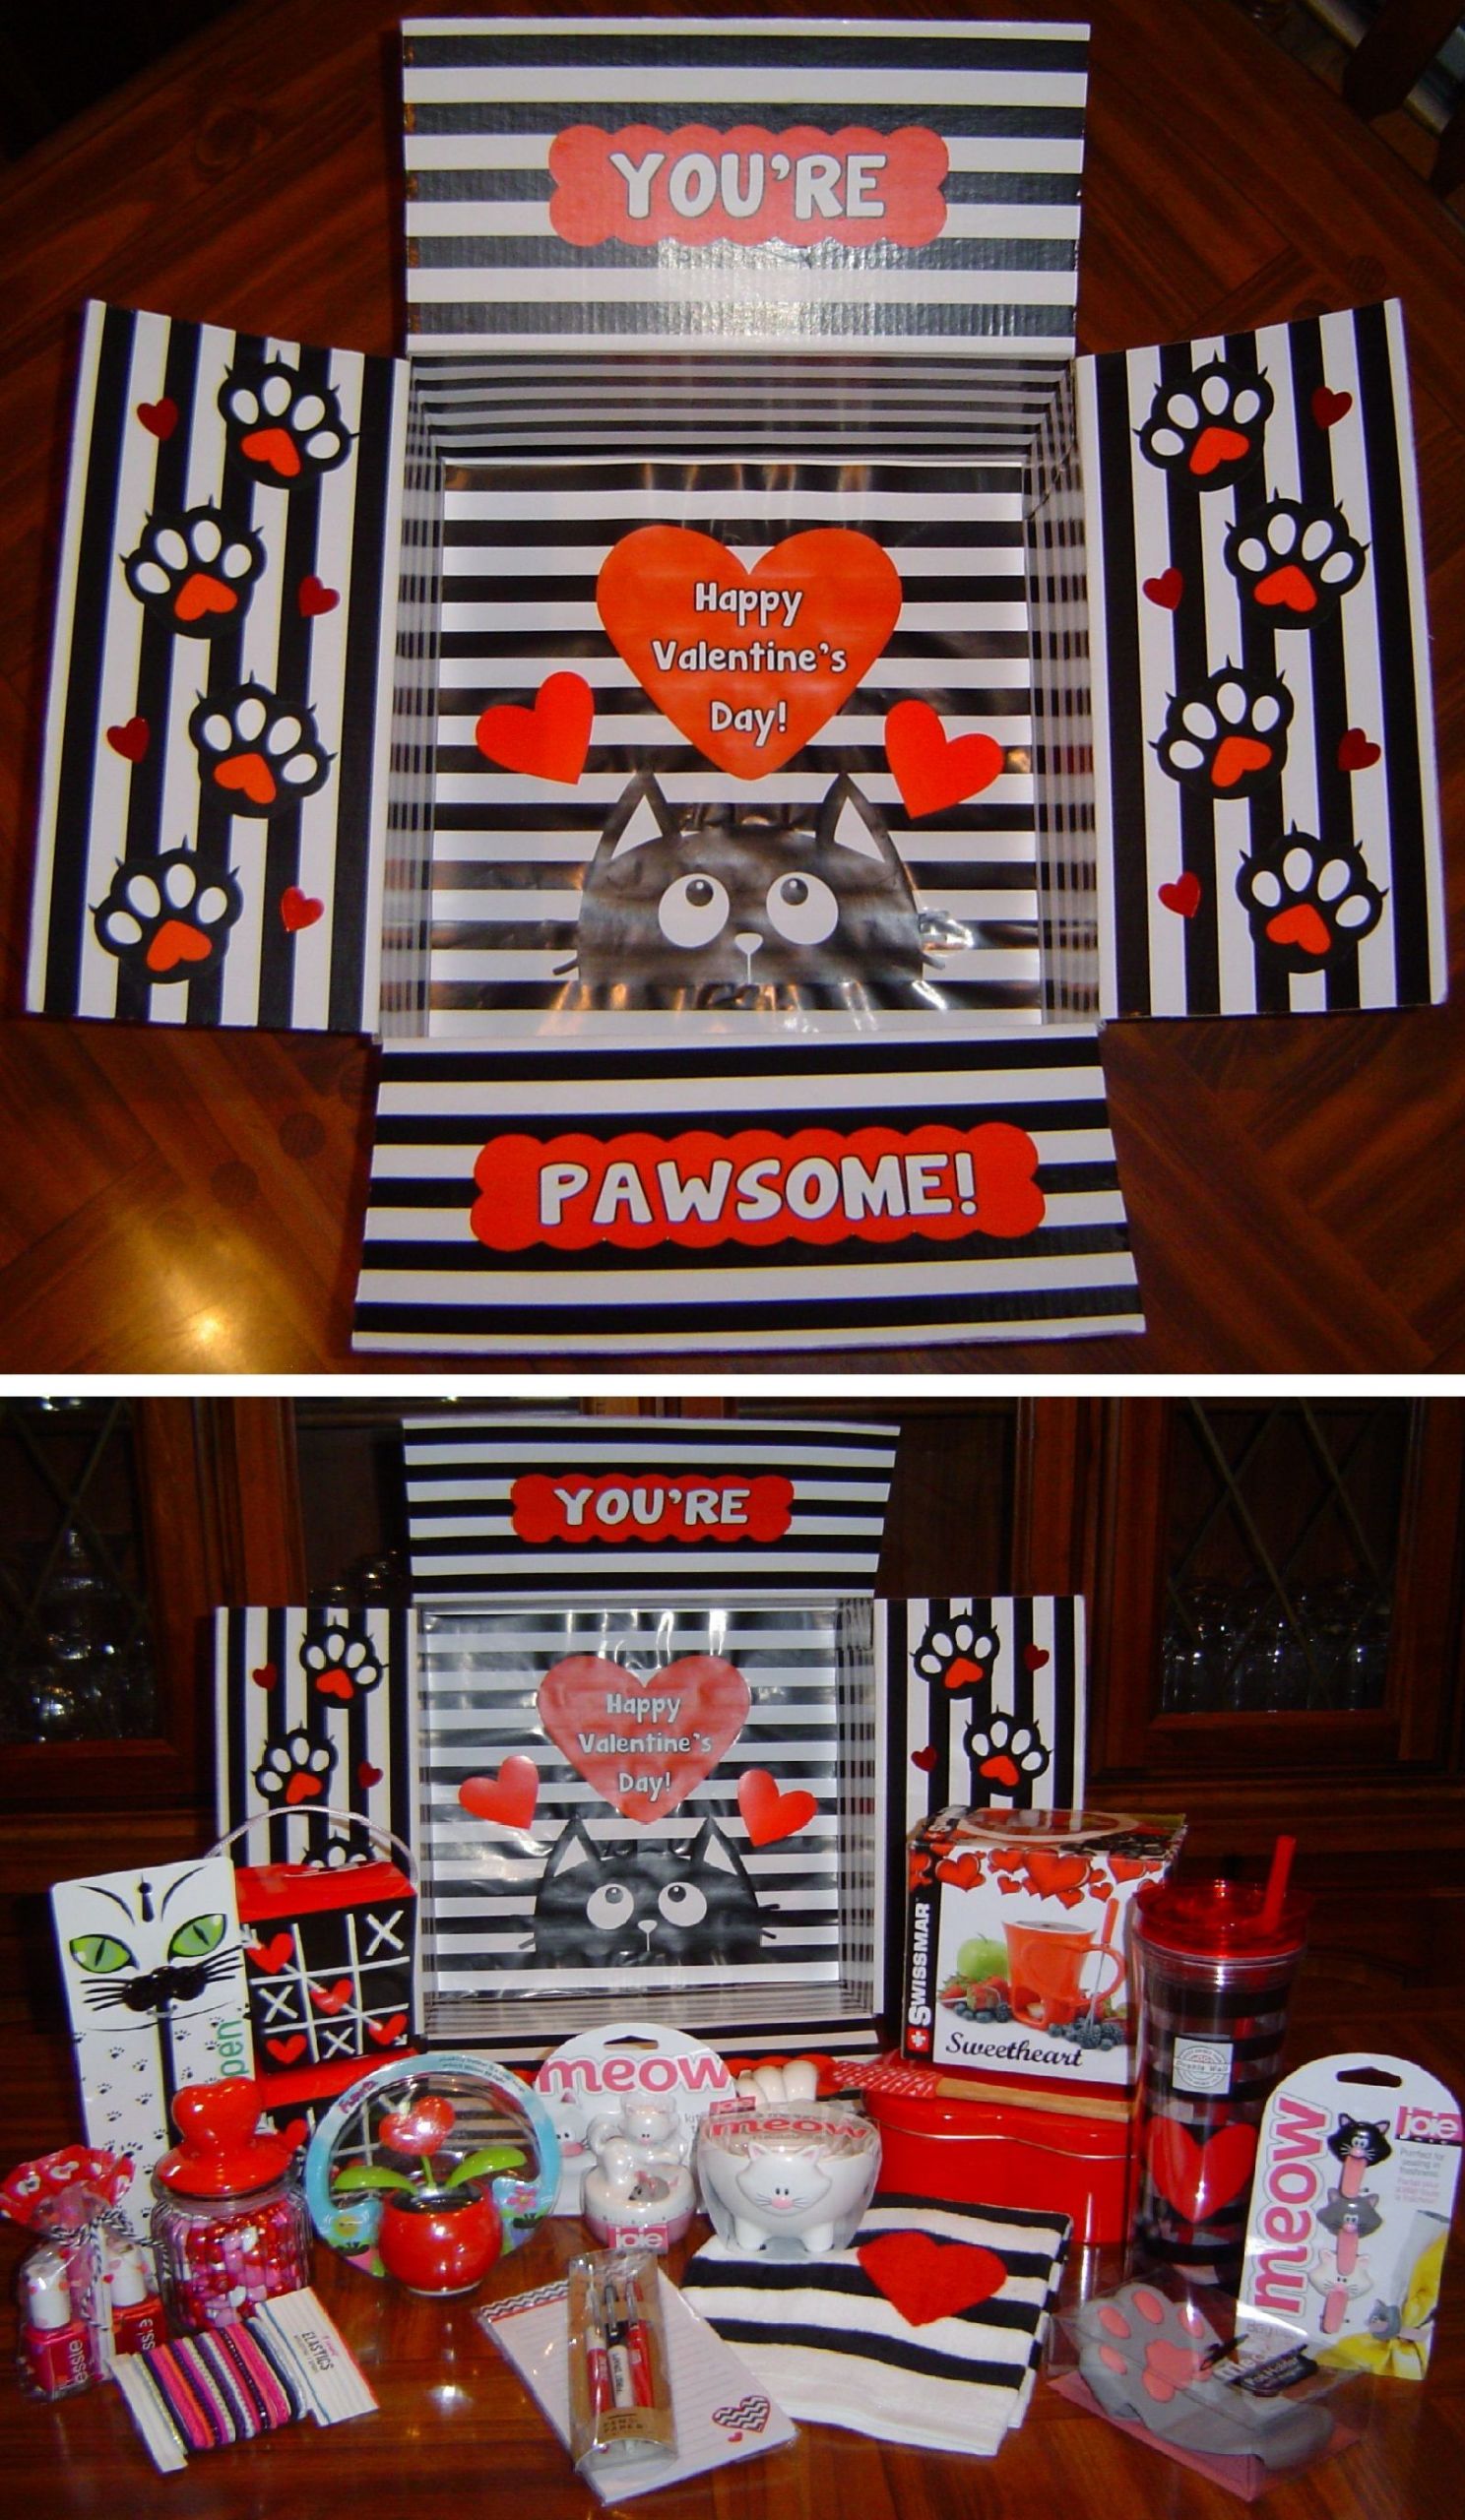 Valentine Gift Ideas For College Daughter
 You re Pawsome Happy Valentine s Day care package Sent